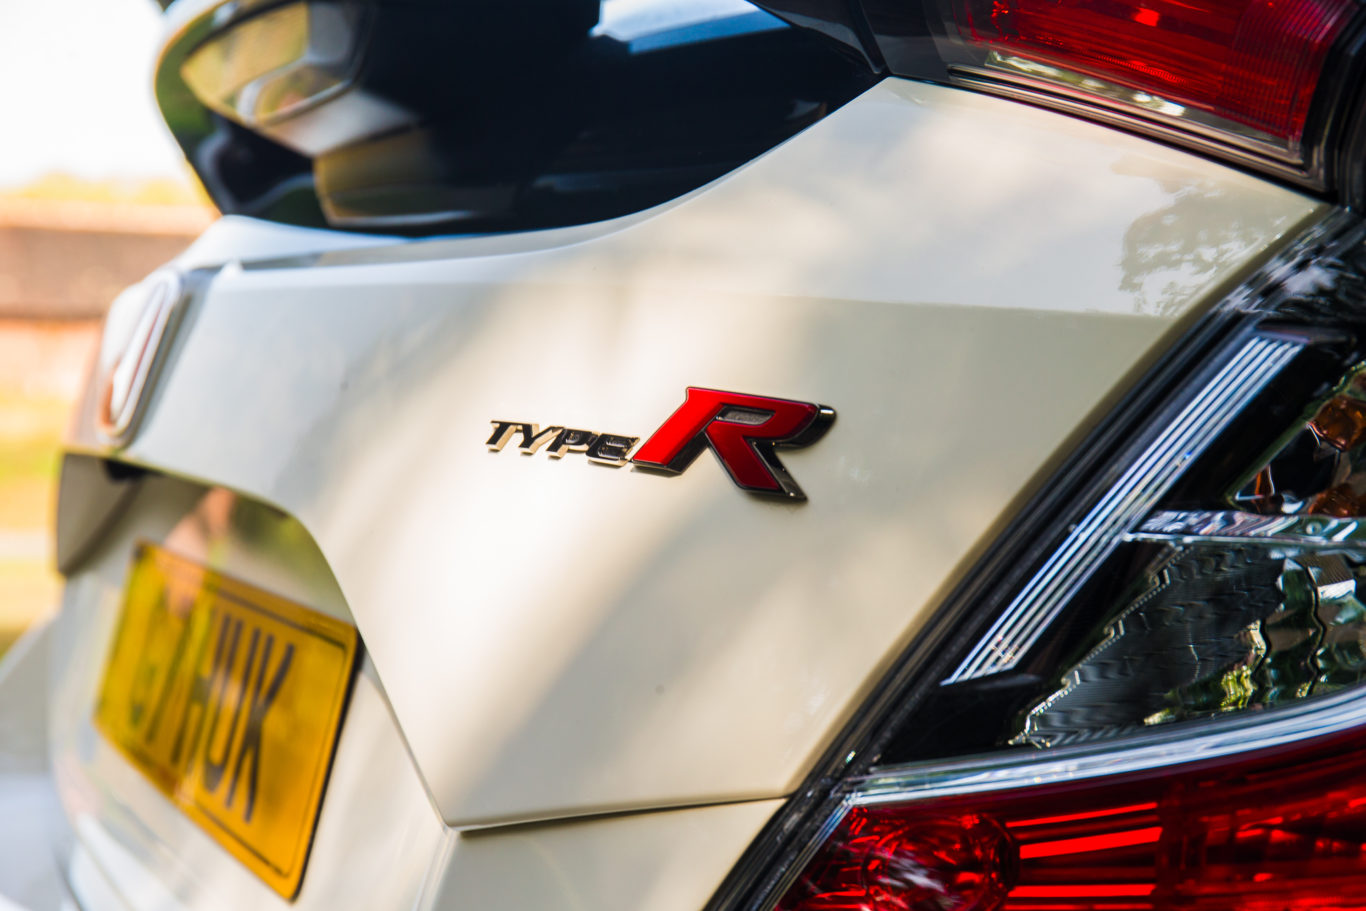 The Type R looks mean, and feels mean too